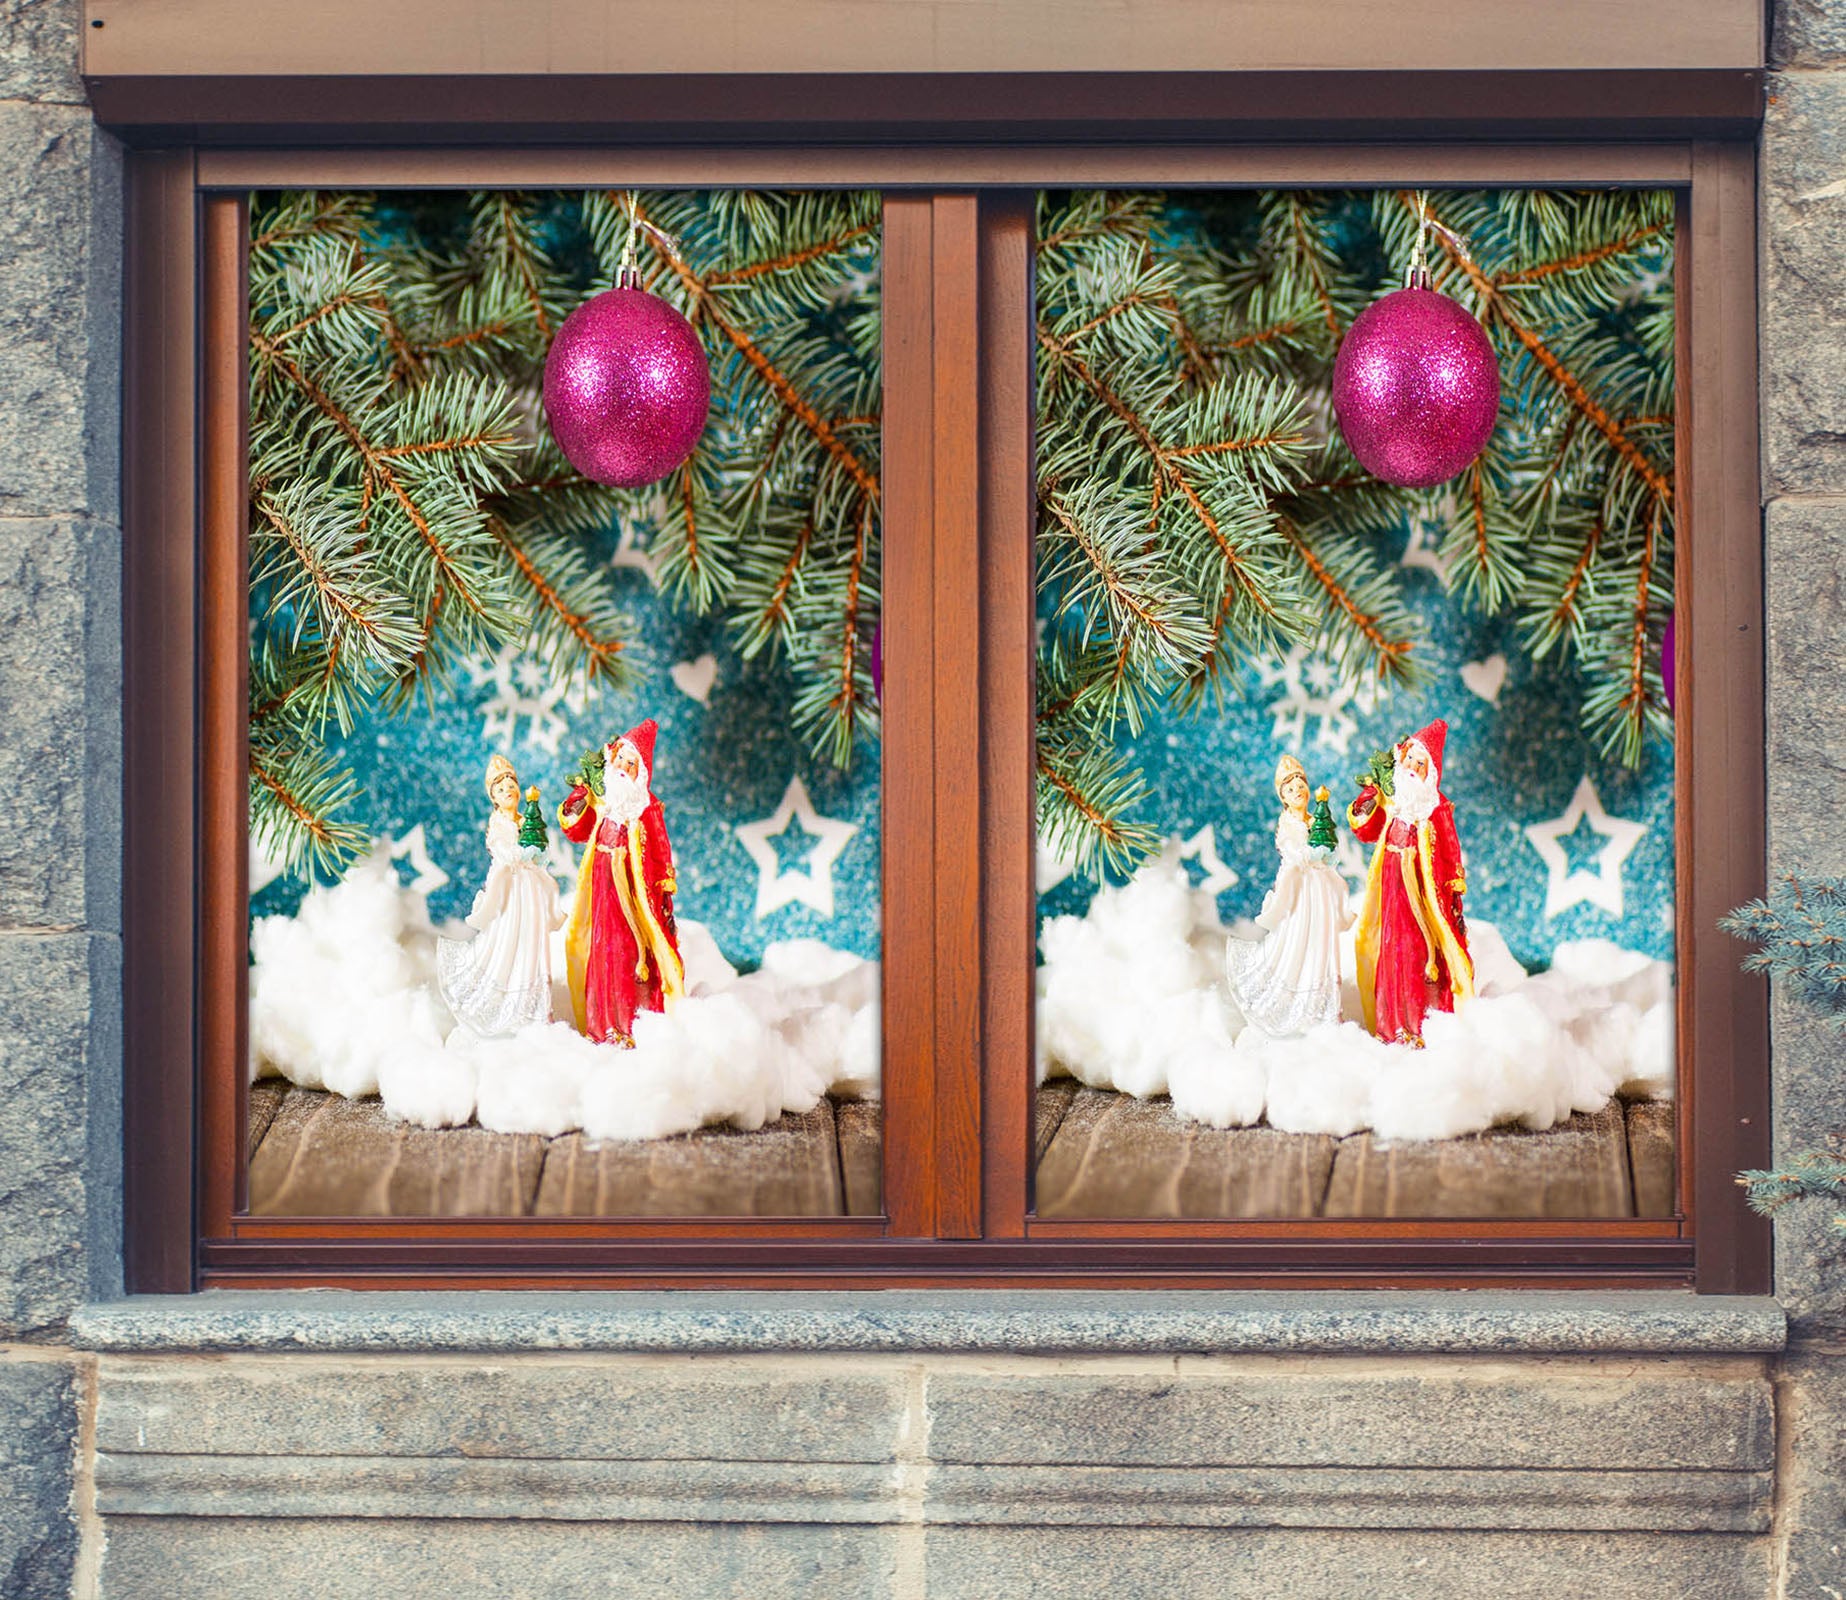 3D Santa Claus Ornaments 30059 Christmas Window Film Print Sticker Cling Stained Glass Xmas